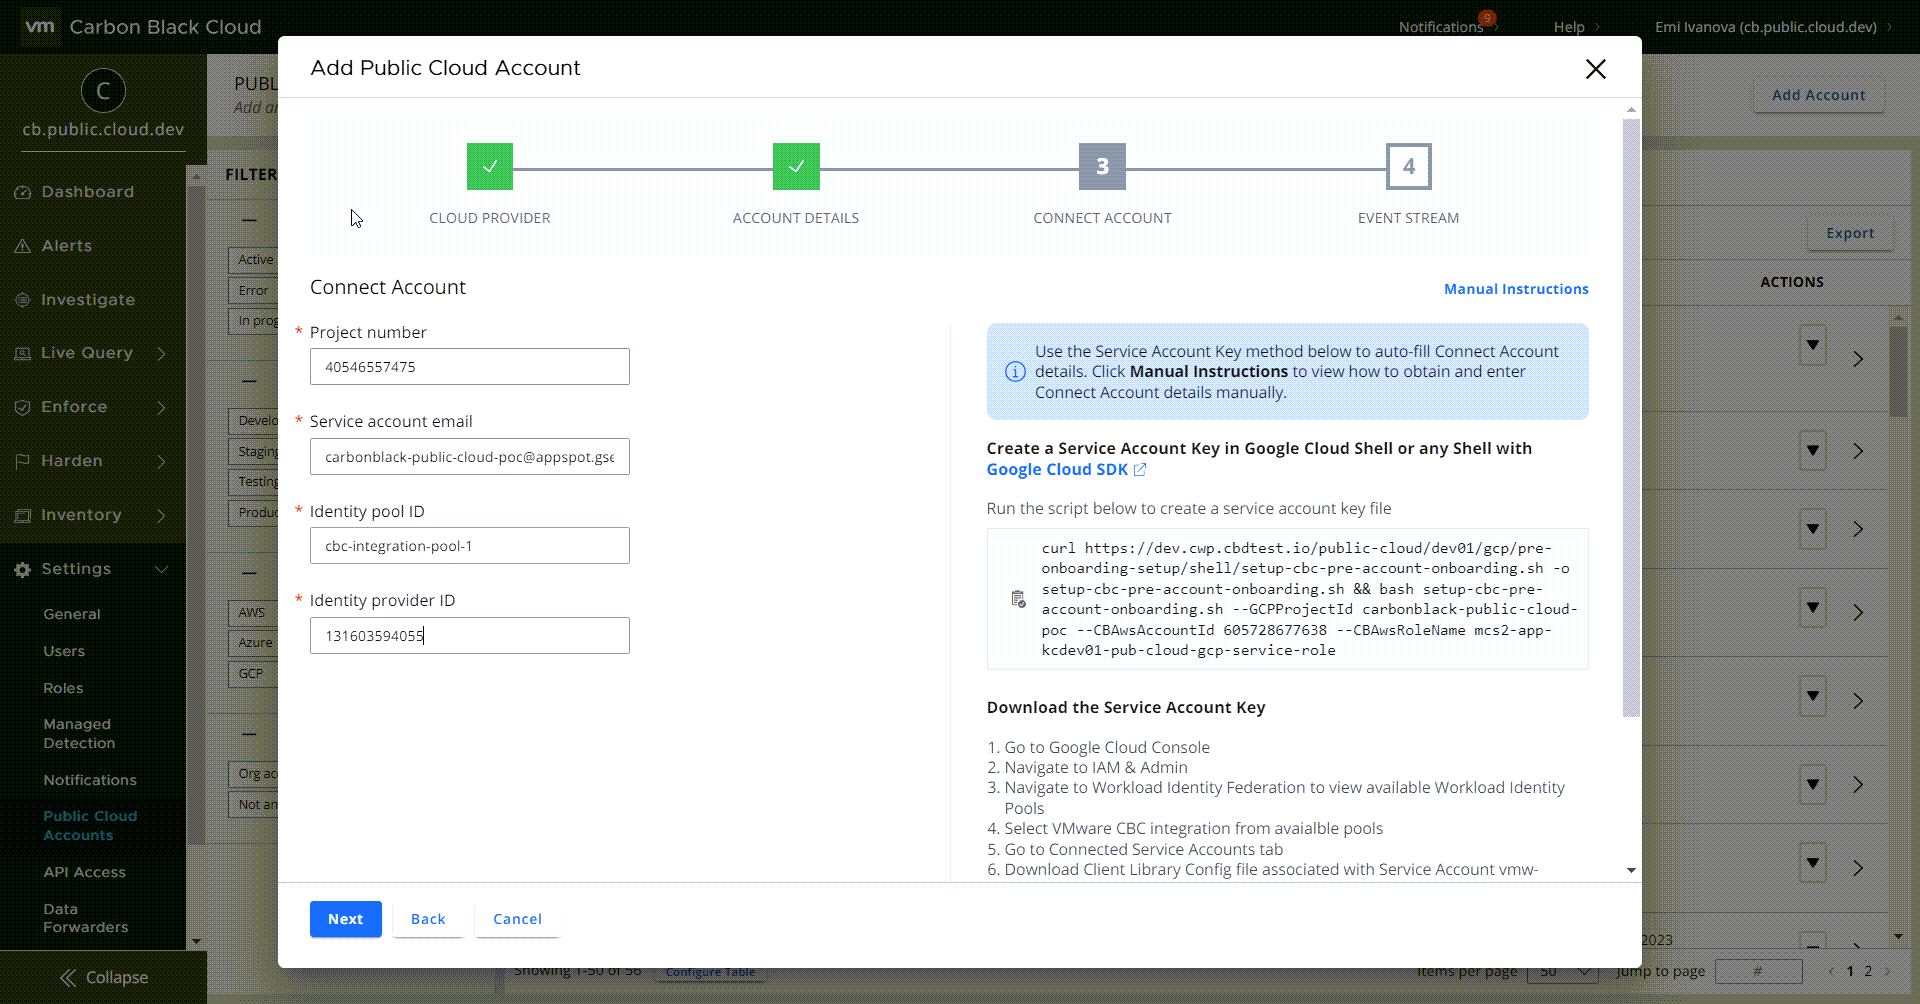 Data that goes into the Carbon Black Cloud wizard for onboarding the GCP project/account.